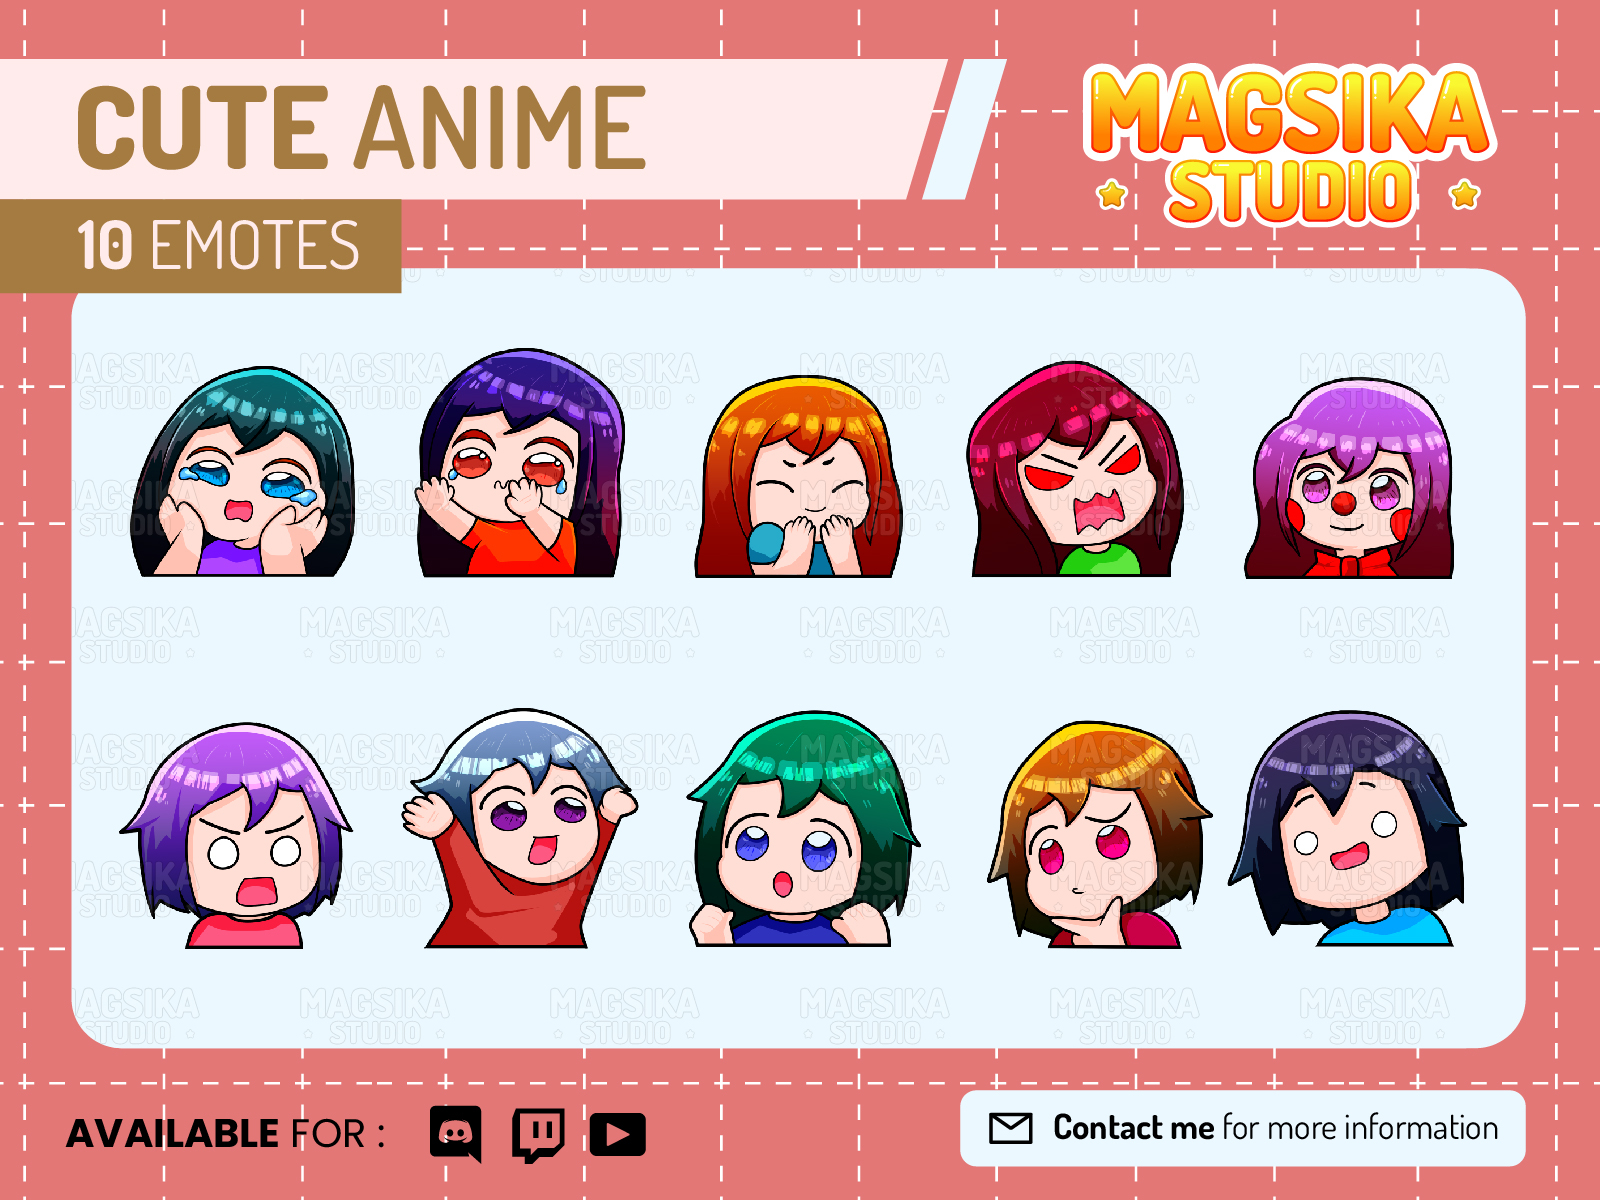 Hiring] Artist who can mimic anime styles for funny discord emotes. I have  an OC I'd like made into discord emotes based on some funny anime faces. If  you think you can